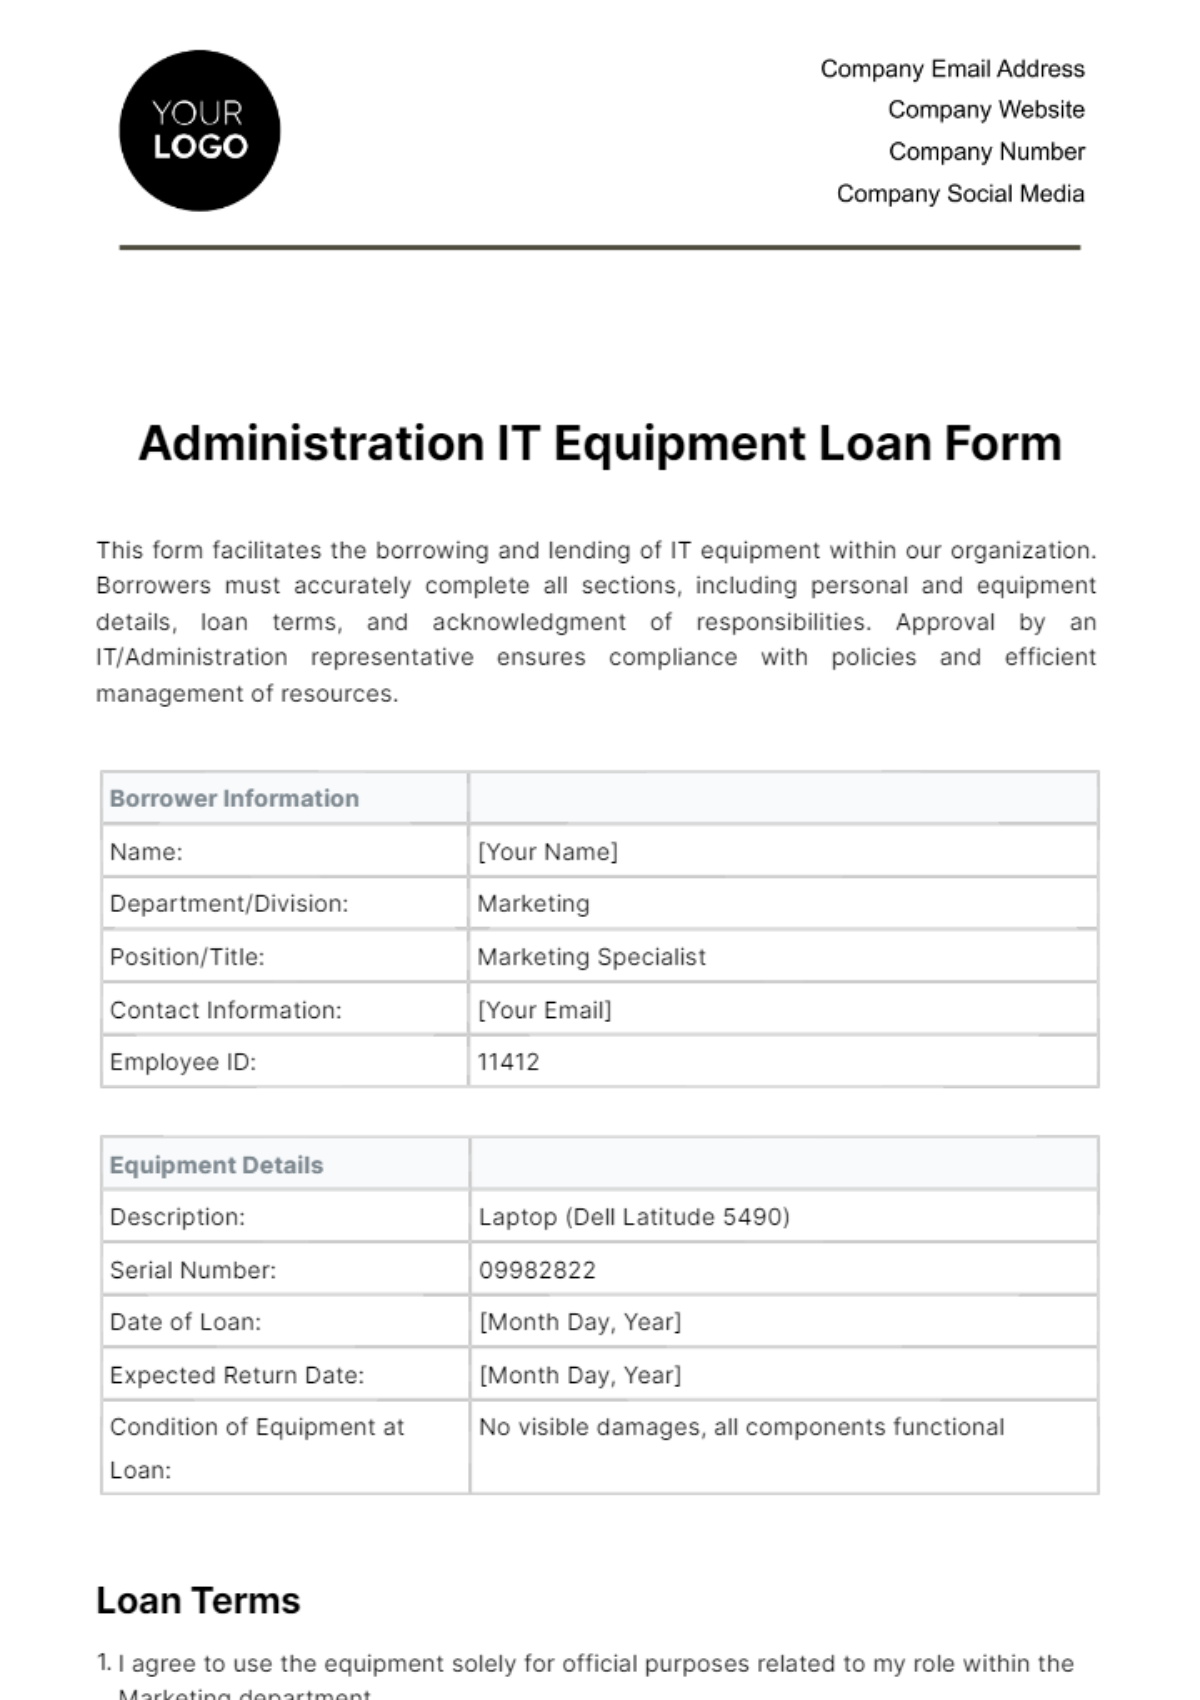 Administration IT Equipment Loan Form Template